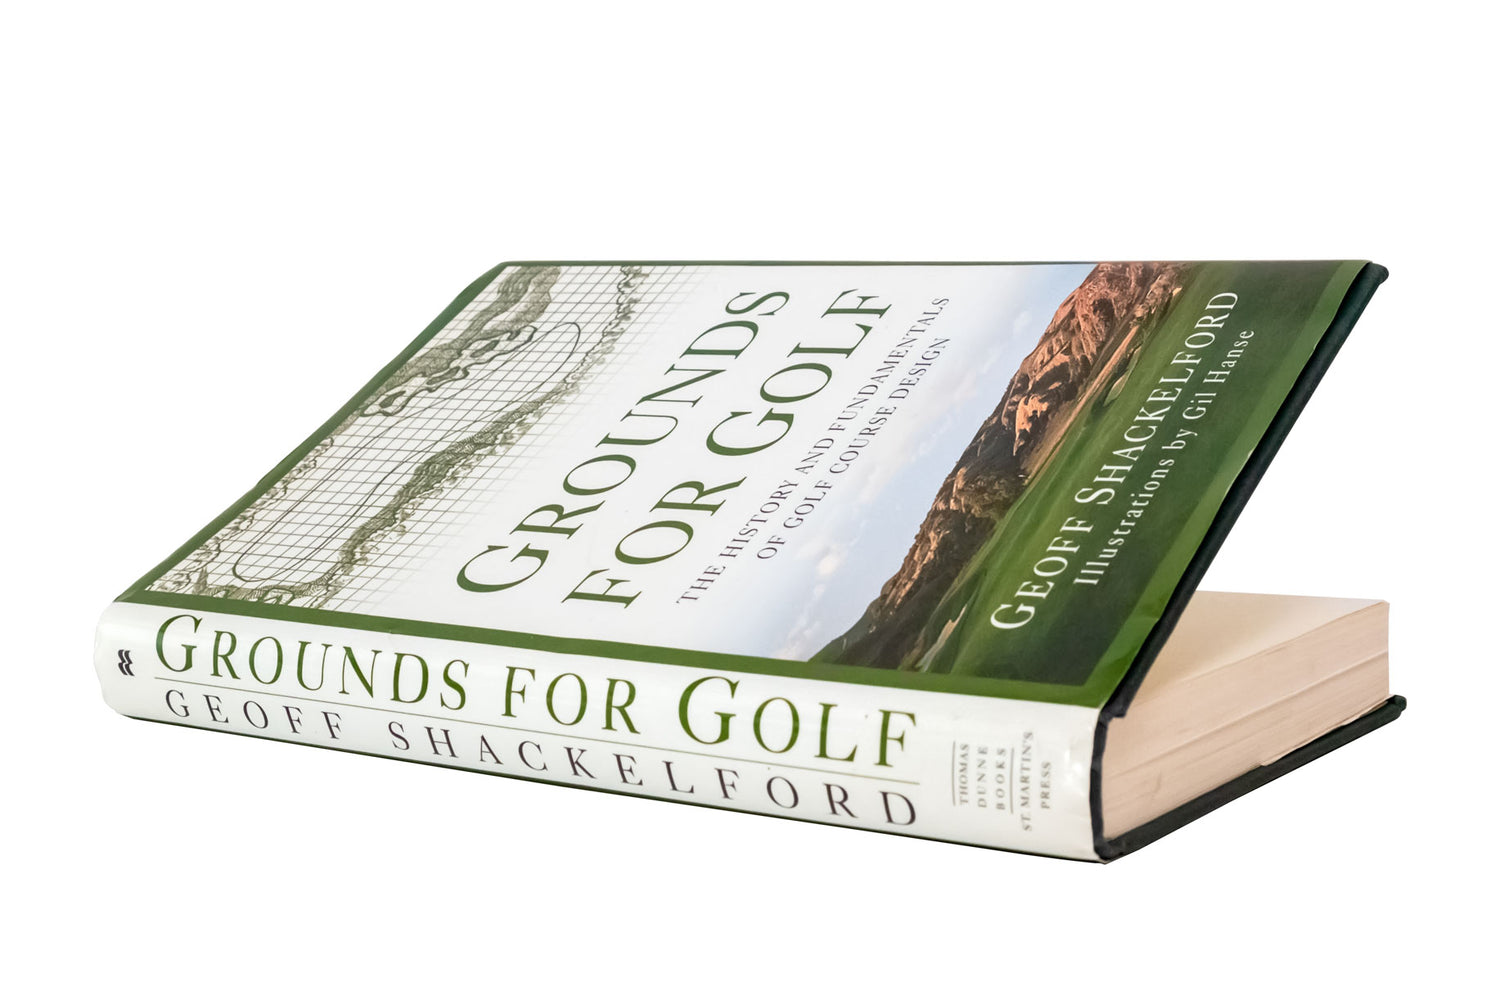 Grounds For Golf by Geoff Shackelford